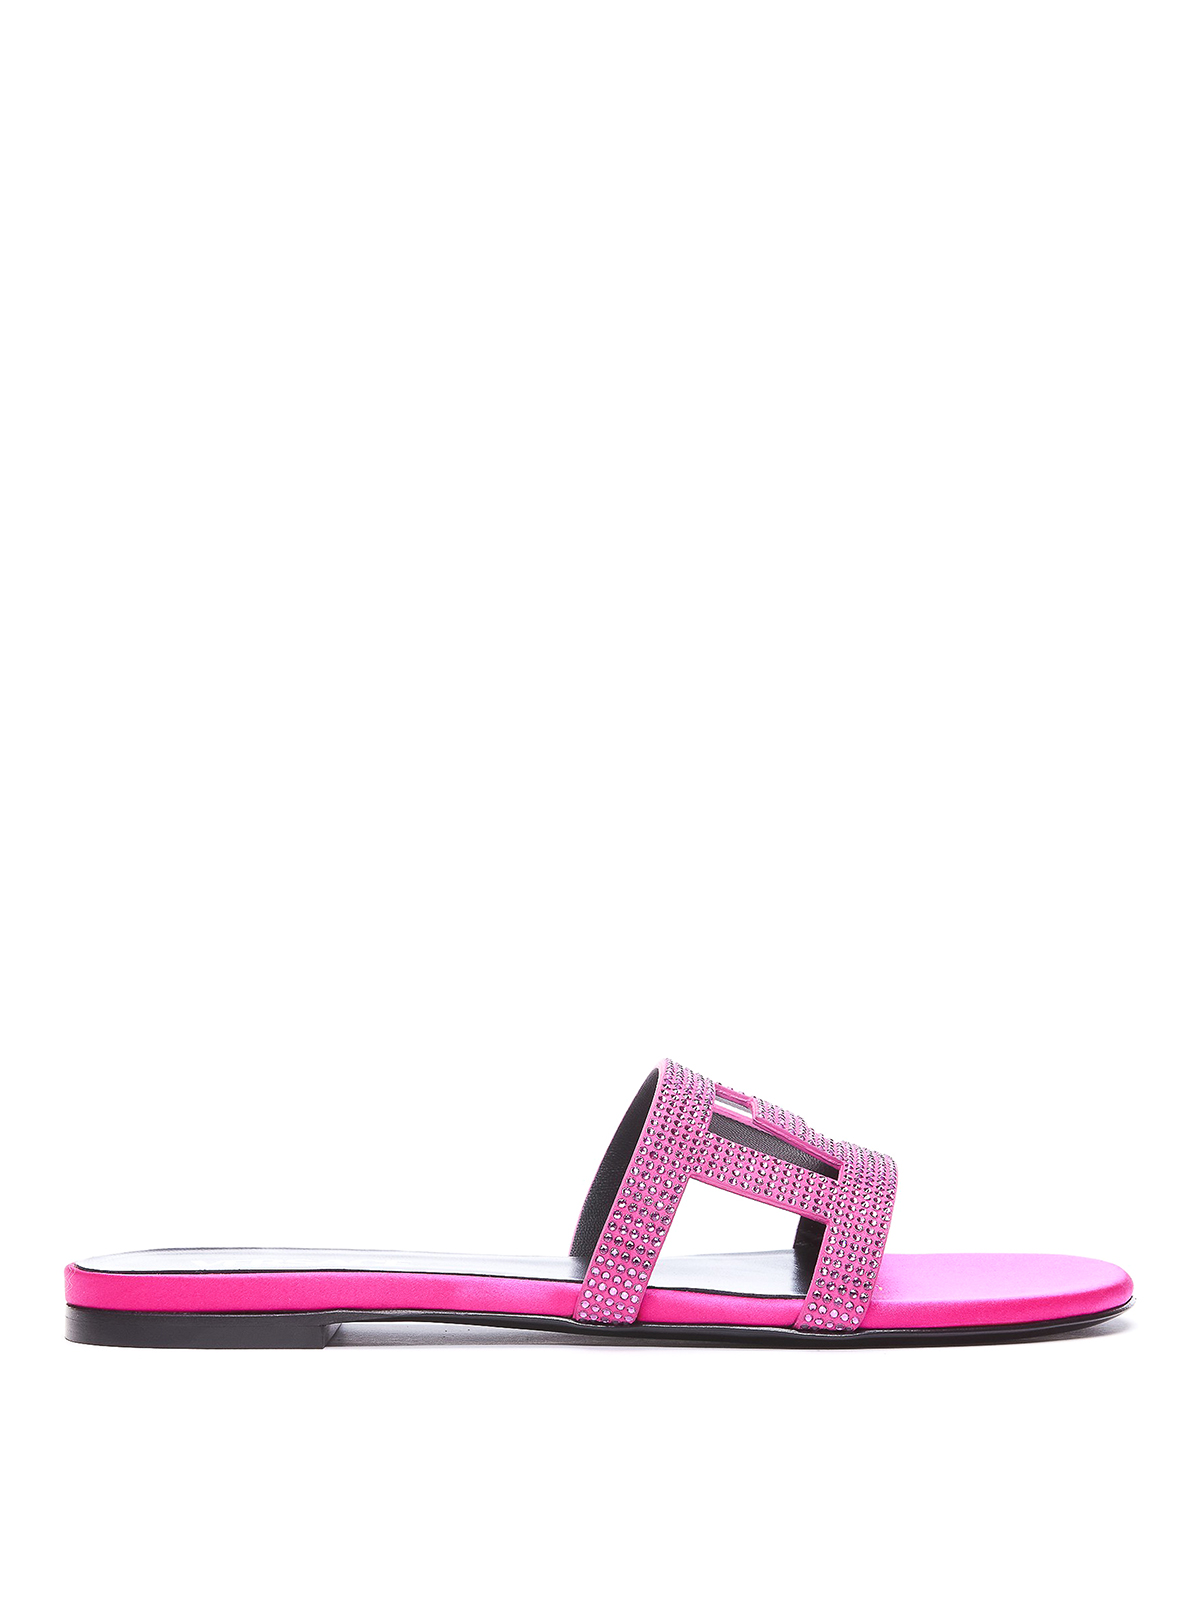 Versace Greca Maze Flat Sandals With Crystals In Bright Pink